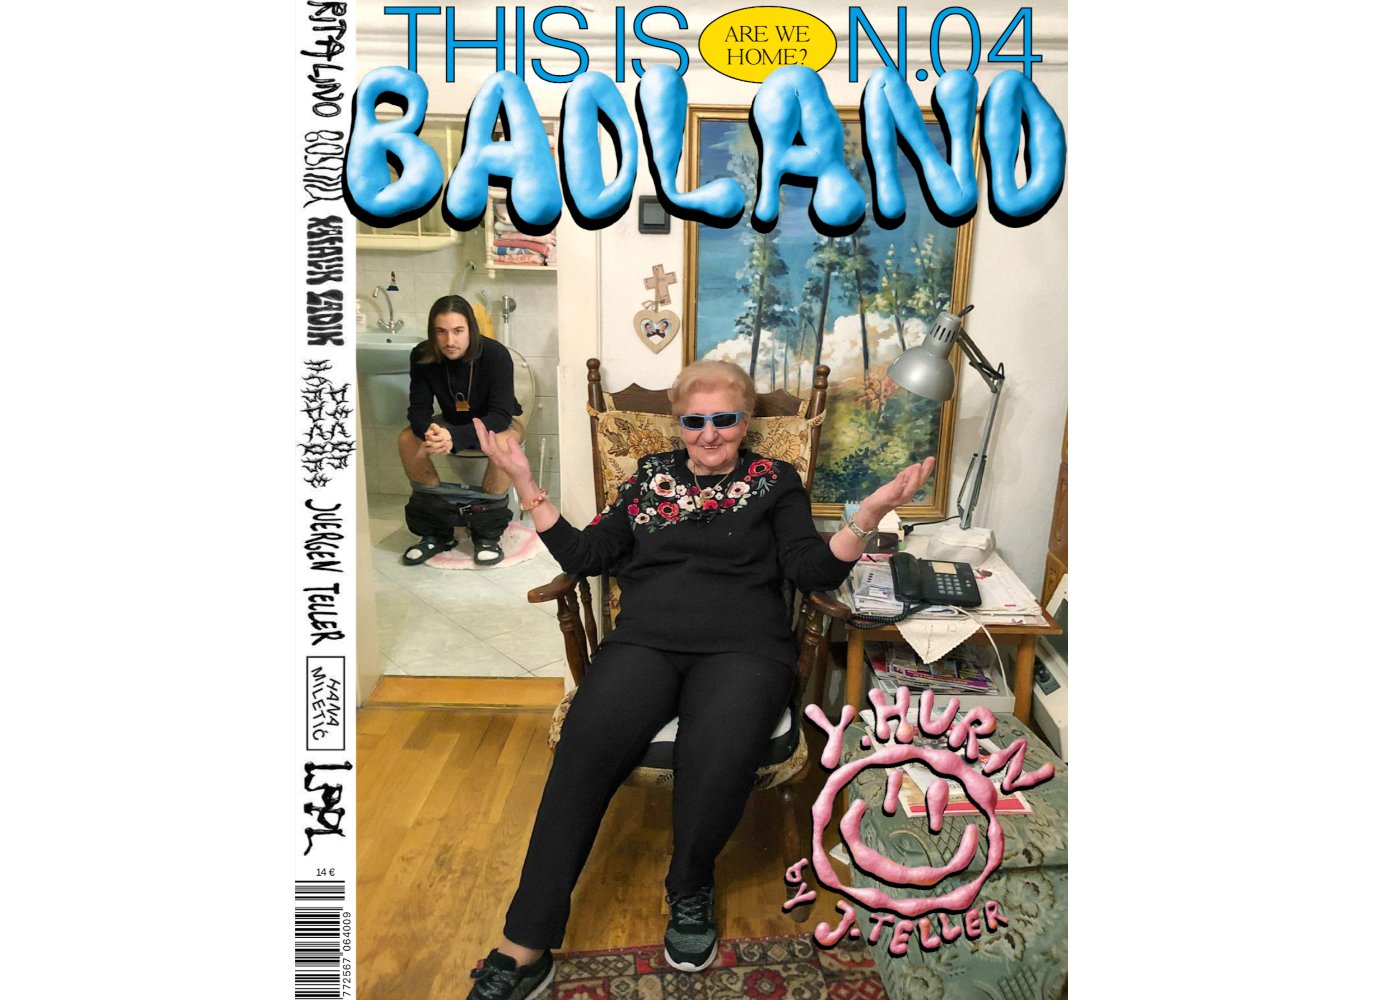 This is Badland: the zine breaking down myths about the Balkans